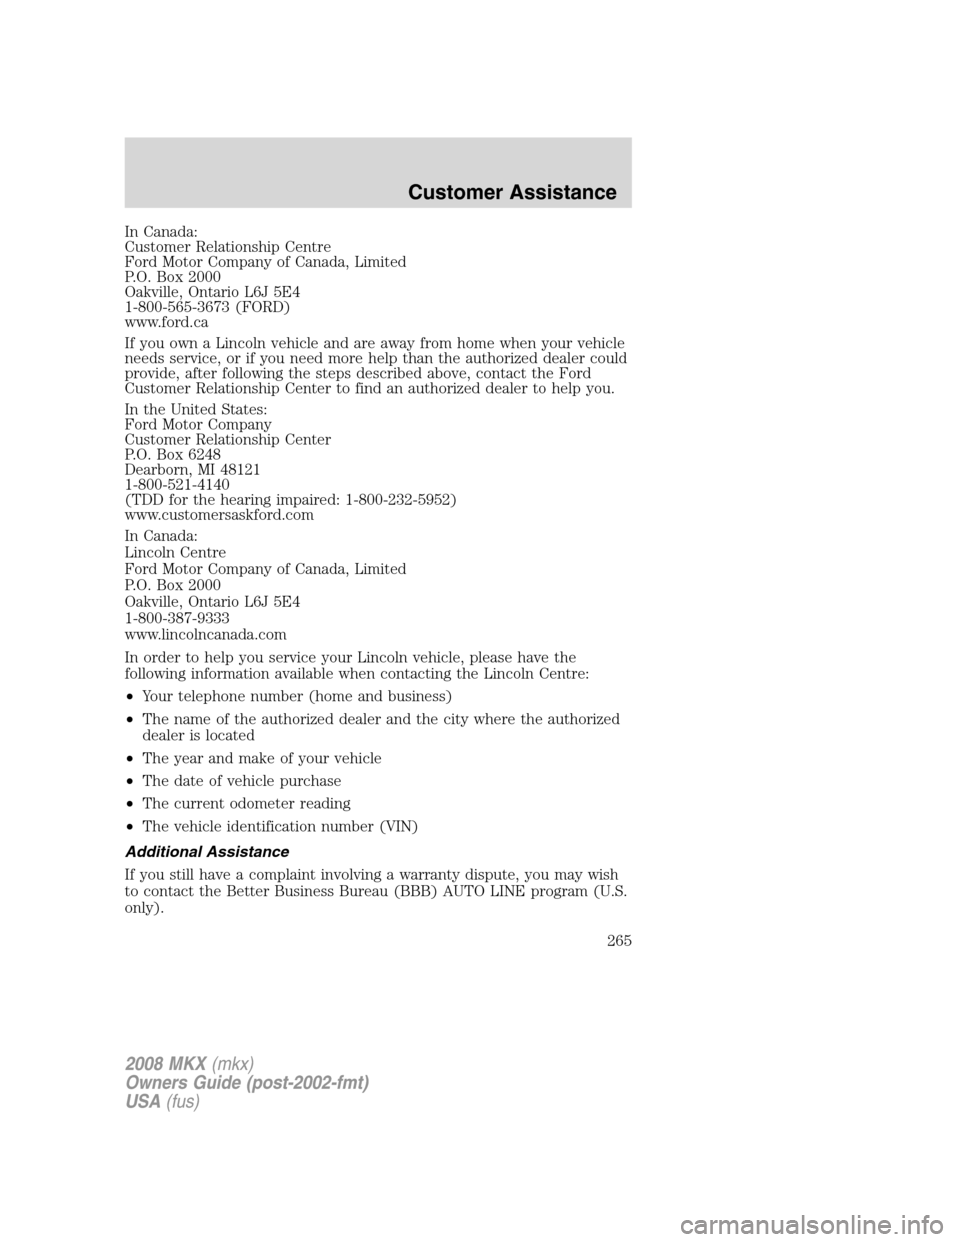 LINCOLN MKX 2008  Owners Manual In Canada:
Customer Relationship Centre
Ford Motor Company of Canada, Limited
P.O. Box 2000
Oakville, Ontario L6J 5E4
1-800-565-3673 (FORD)
www.ford.ca
If you own a Lincoln vehicle and are away from h